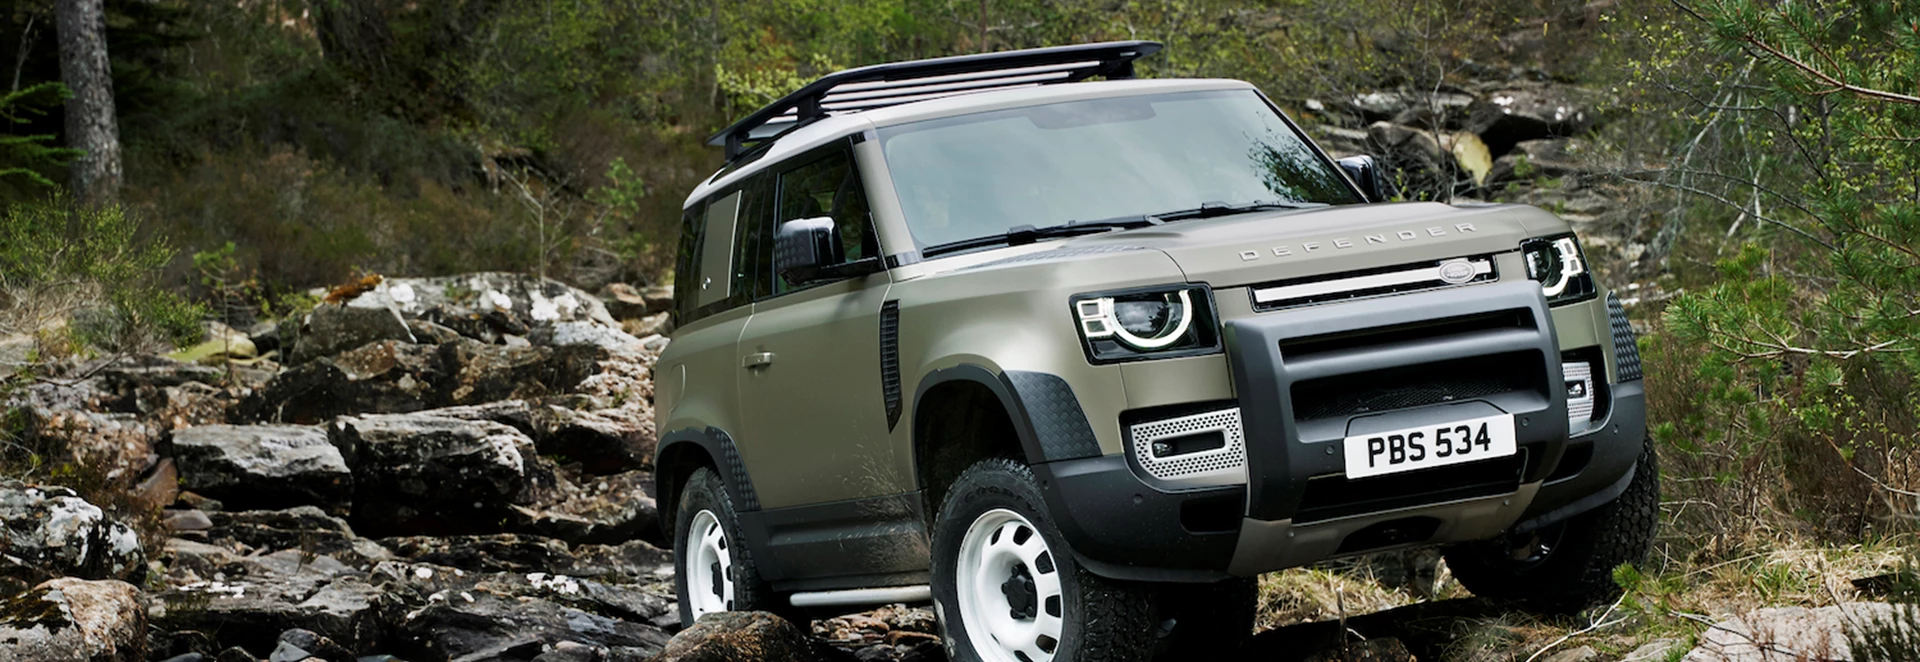 Iconic Defender reborn as Land Rover reveals new SUV